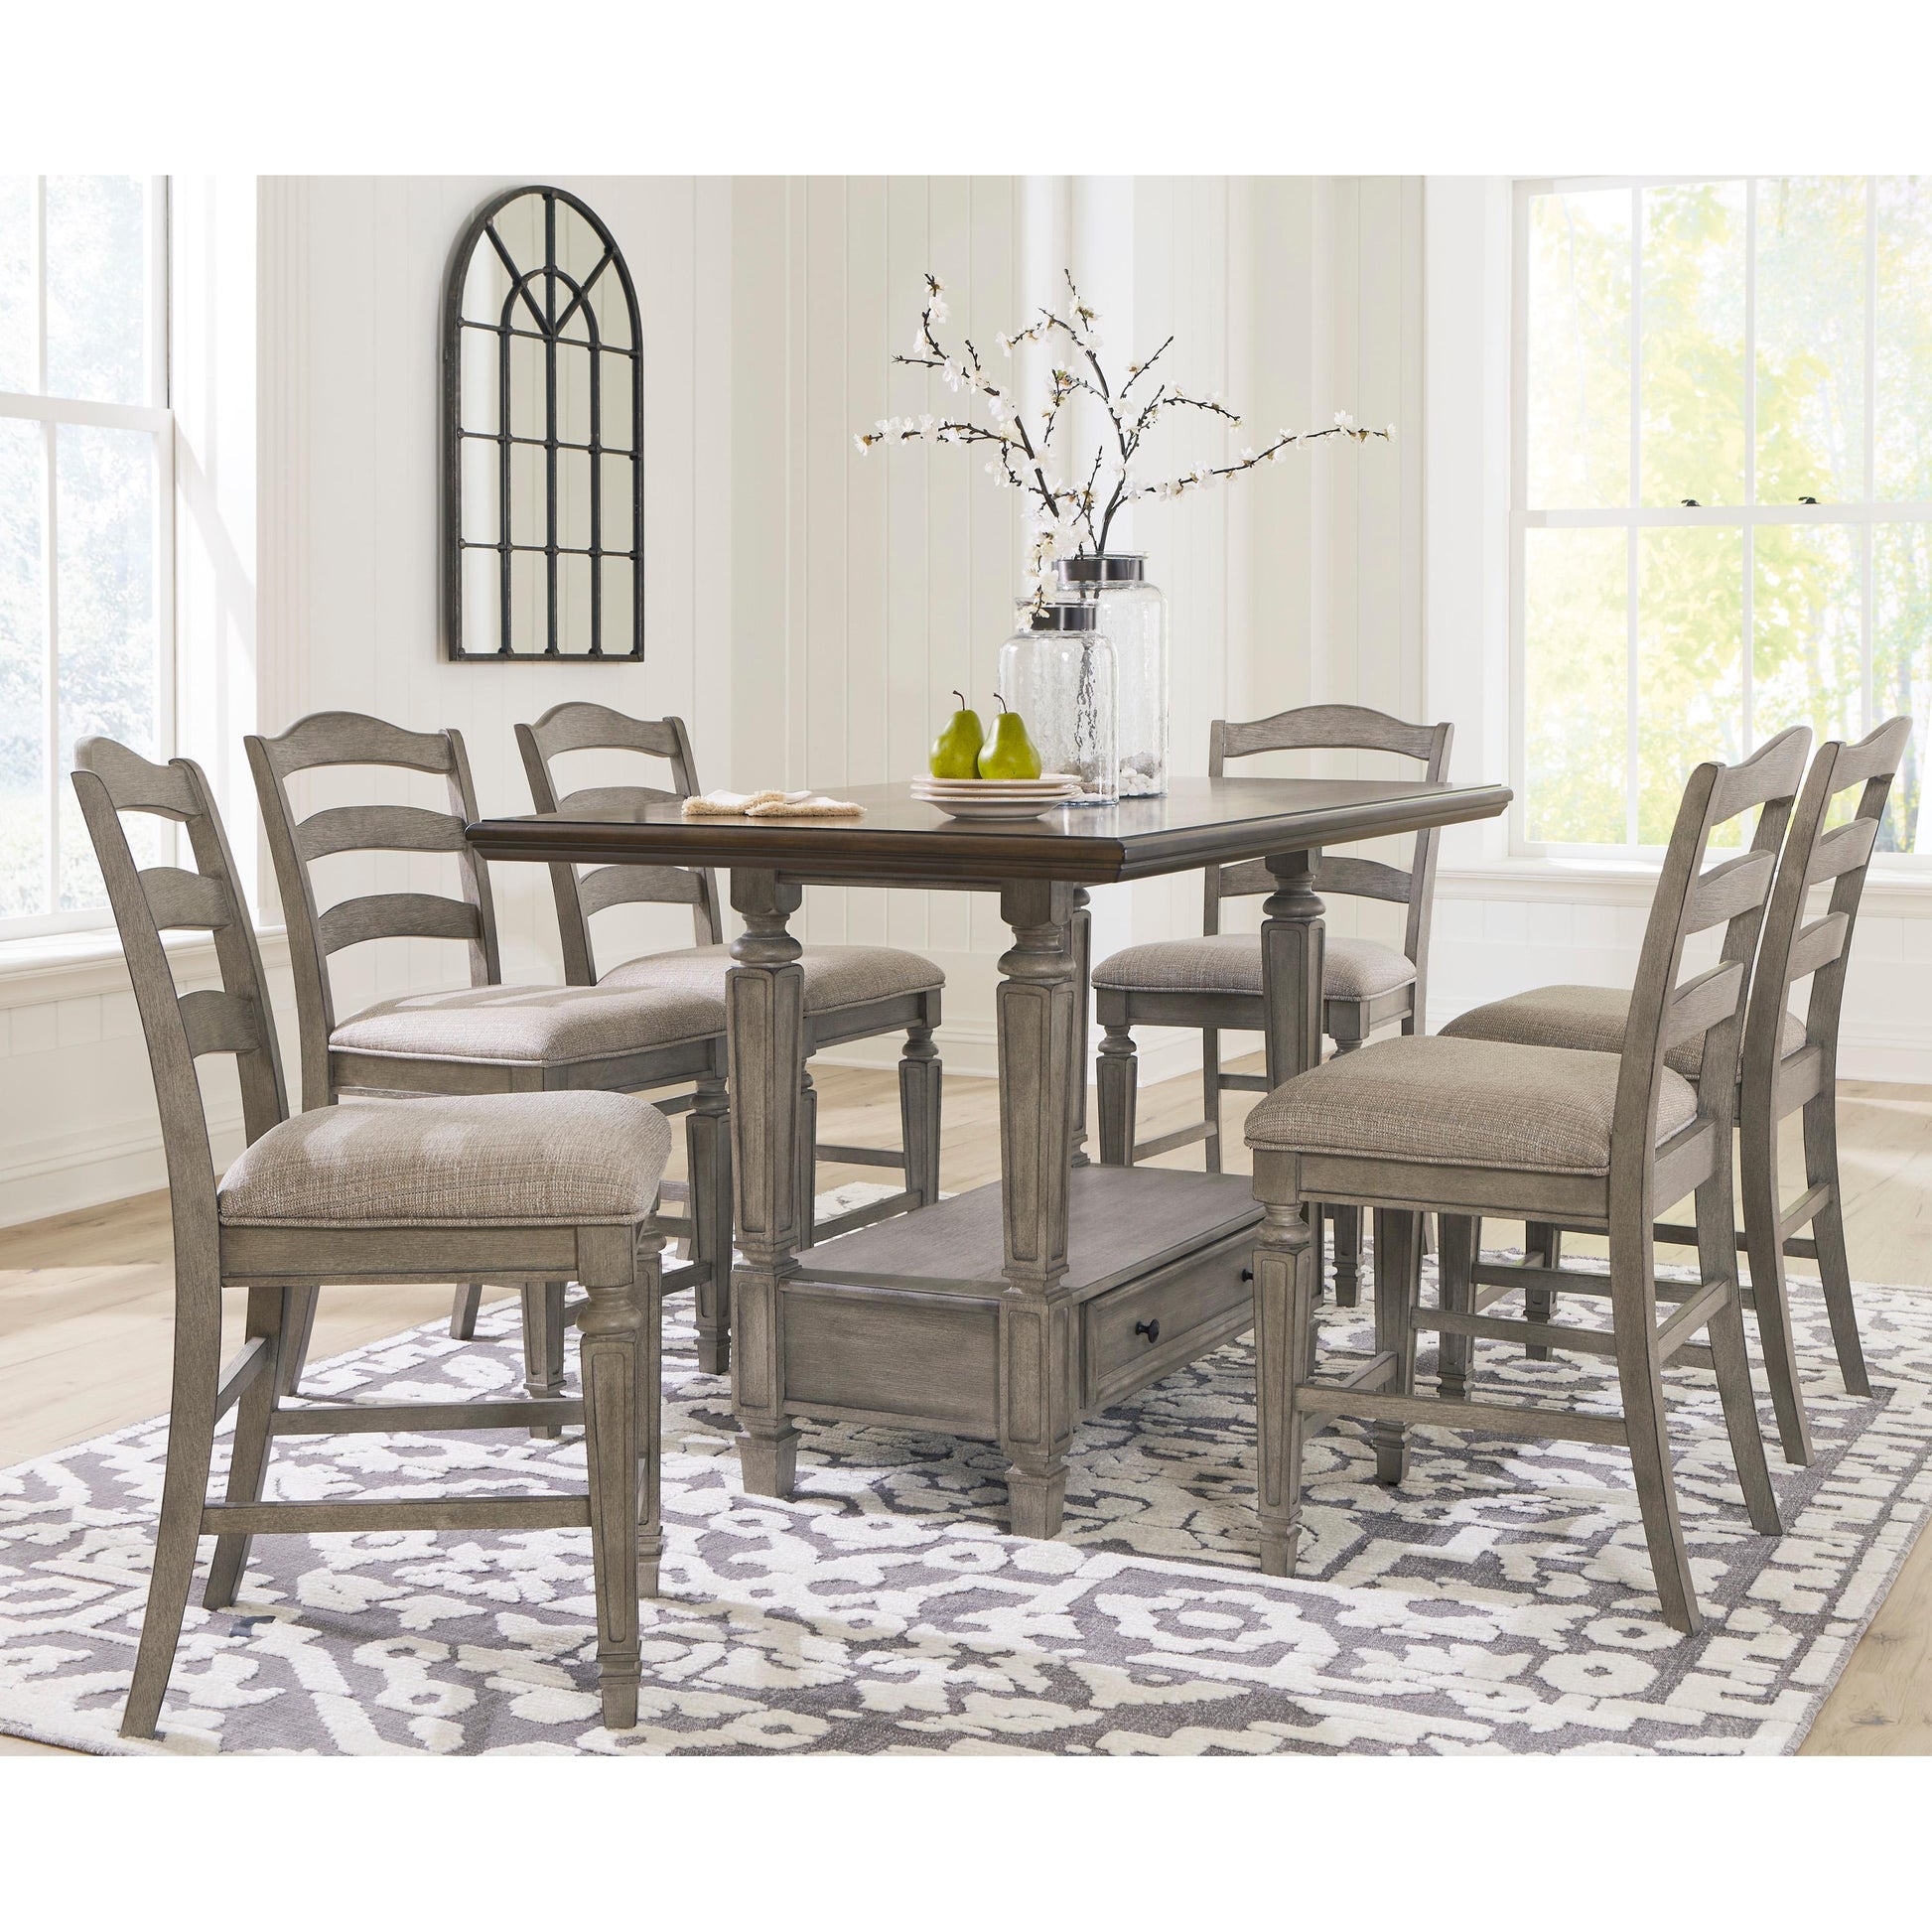 Signature Design by Ashley Lodenbay D751 7 pc Counter Height Dining Set IMAGE 2